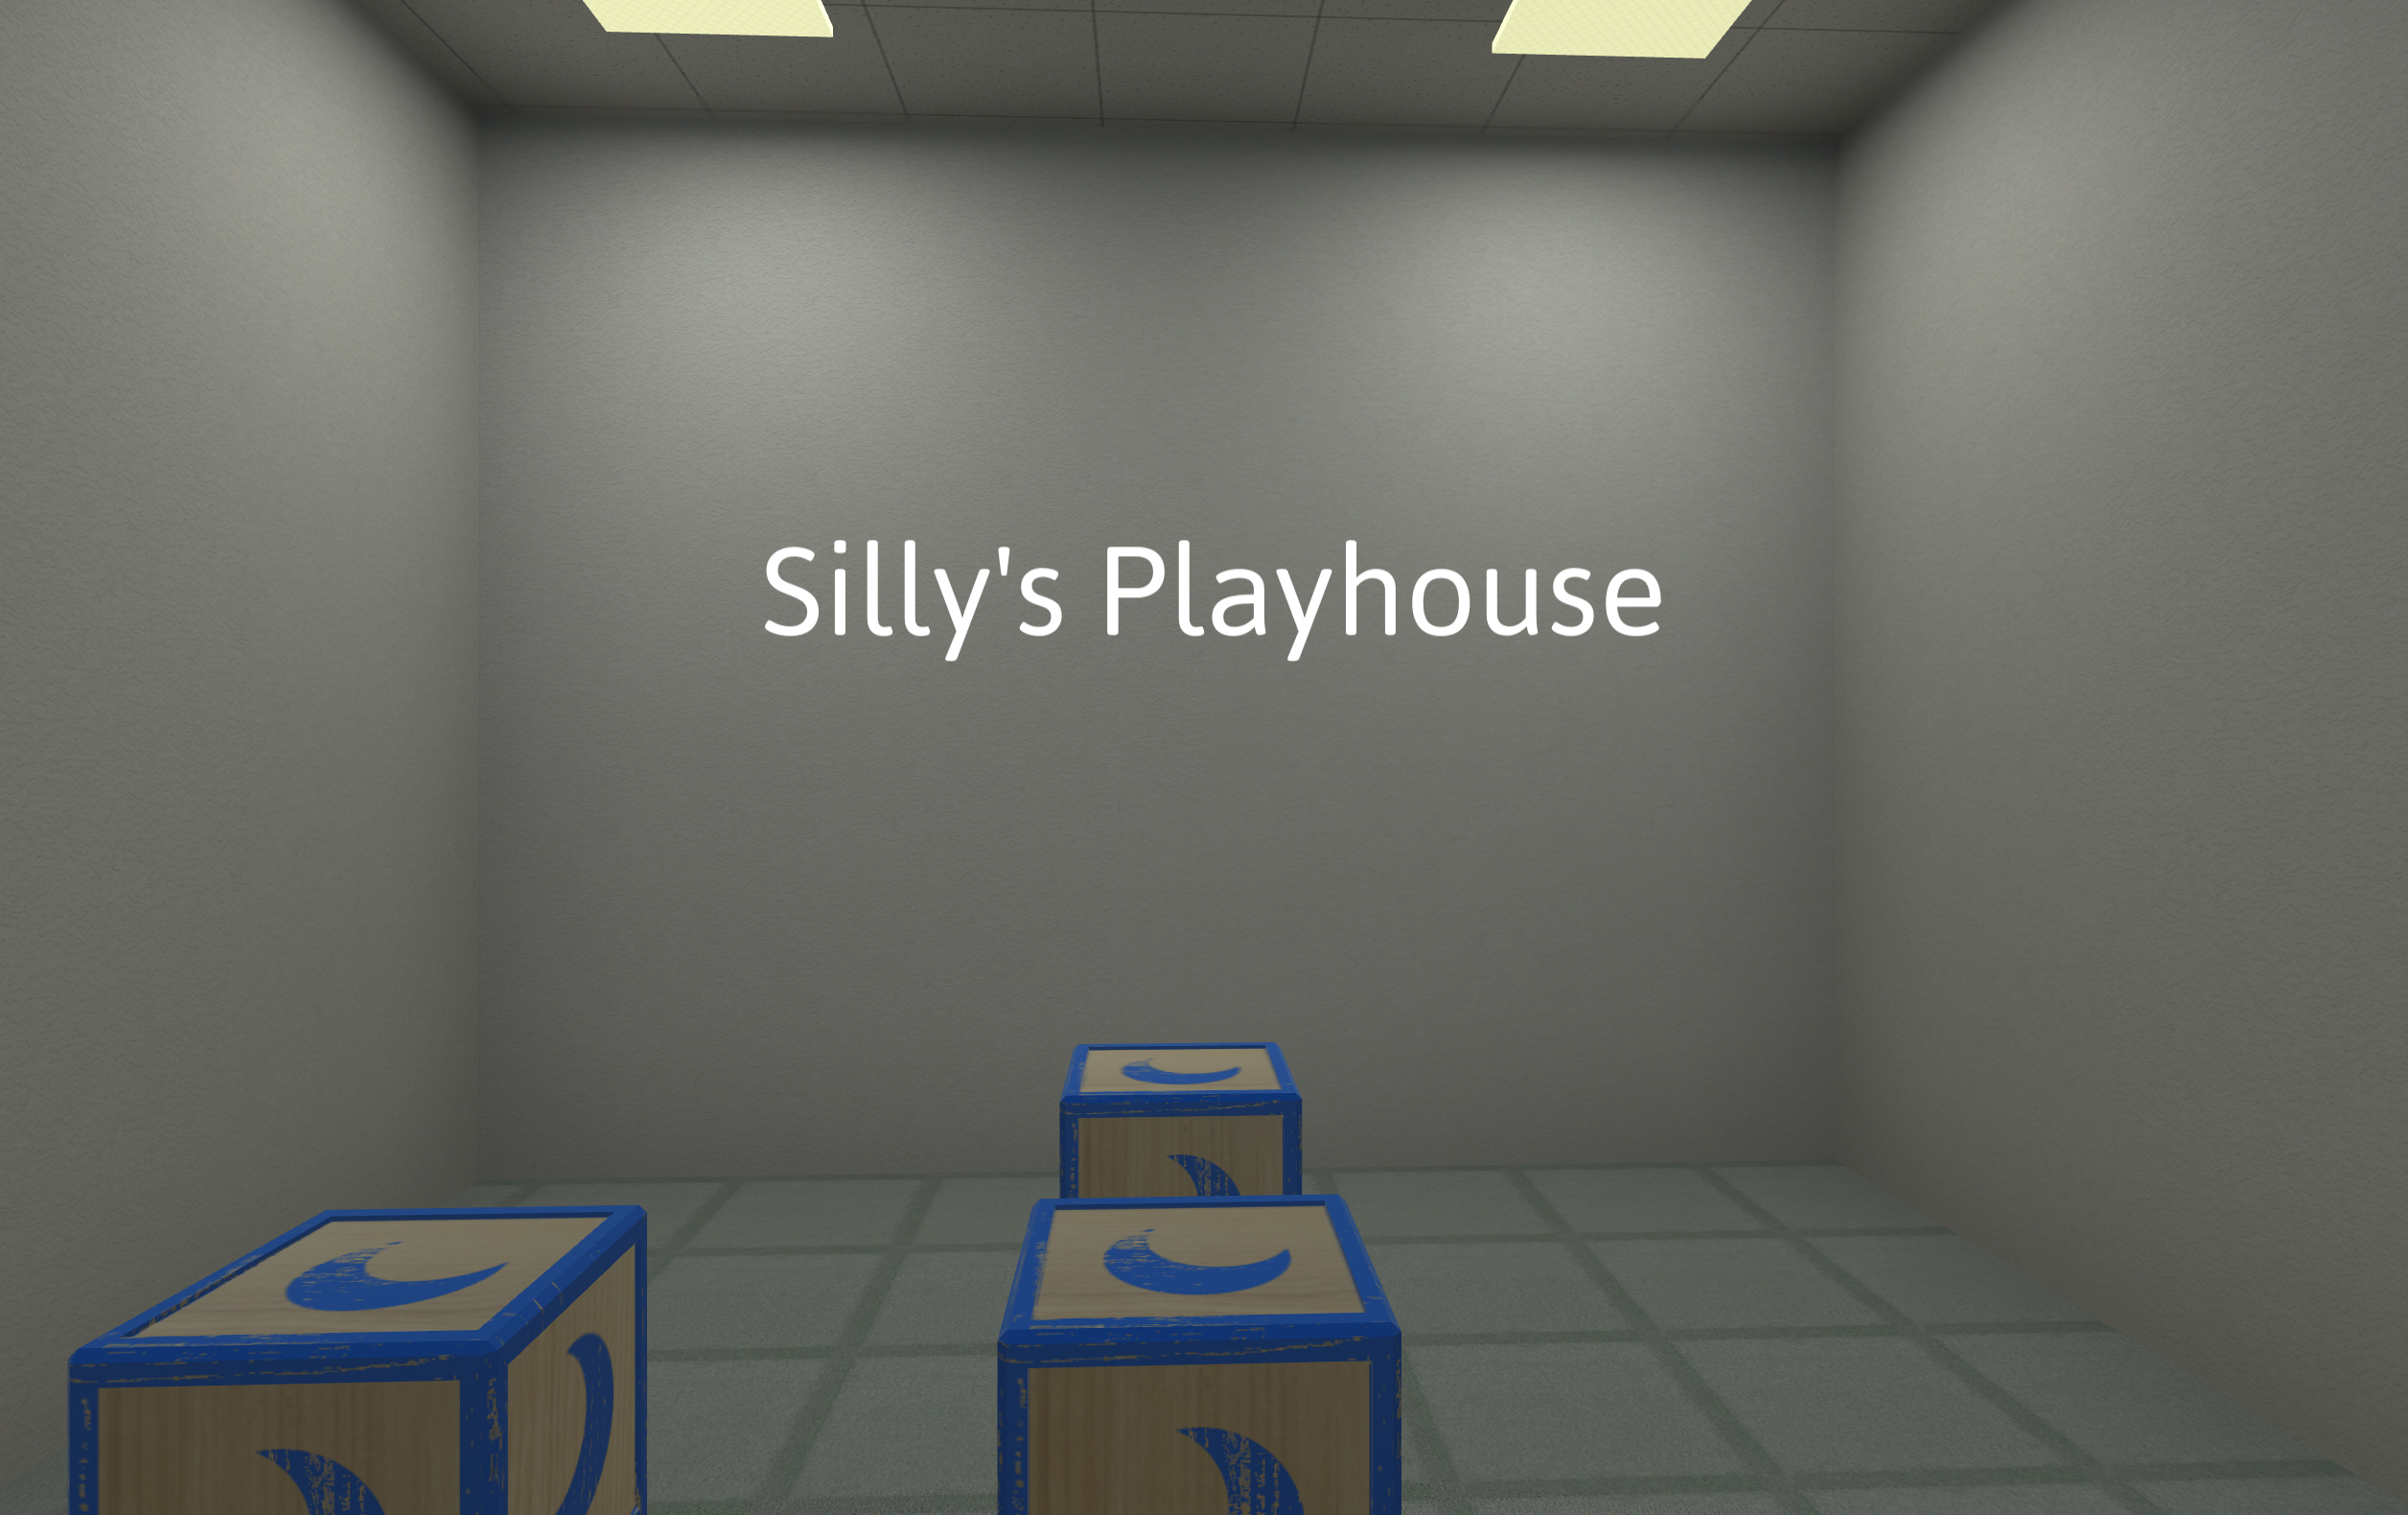 Silly's Playhouse